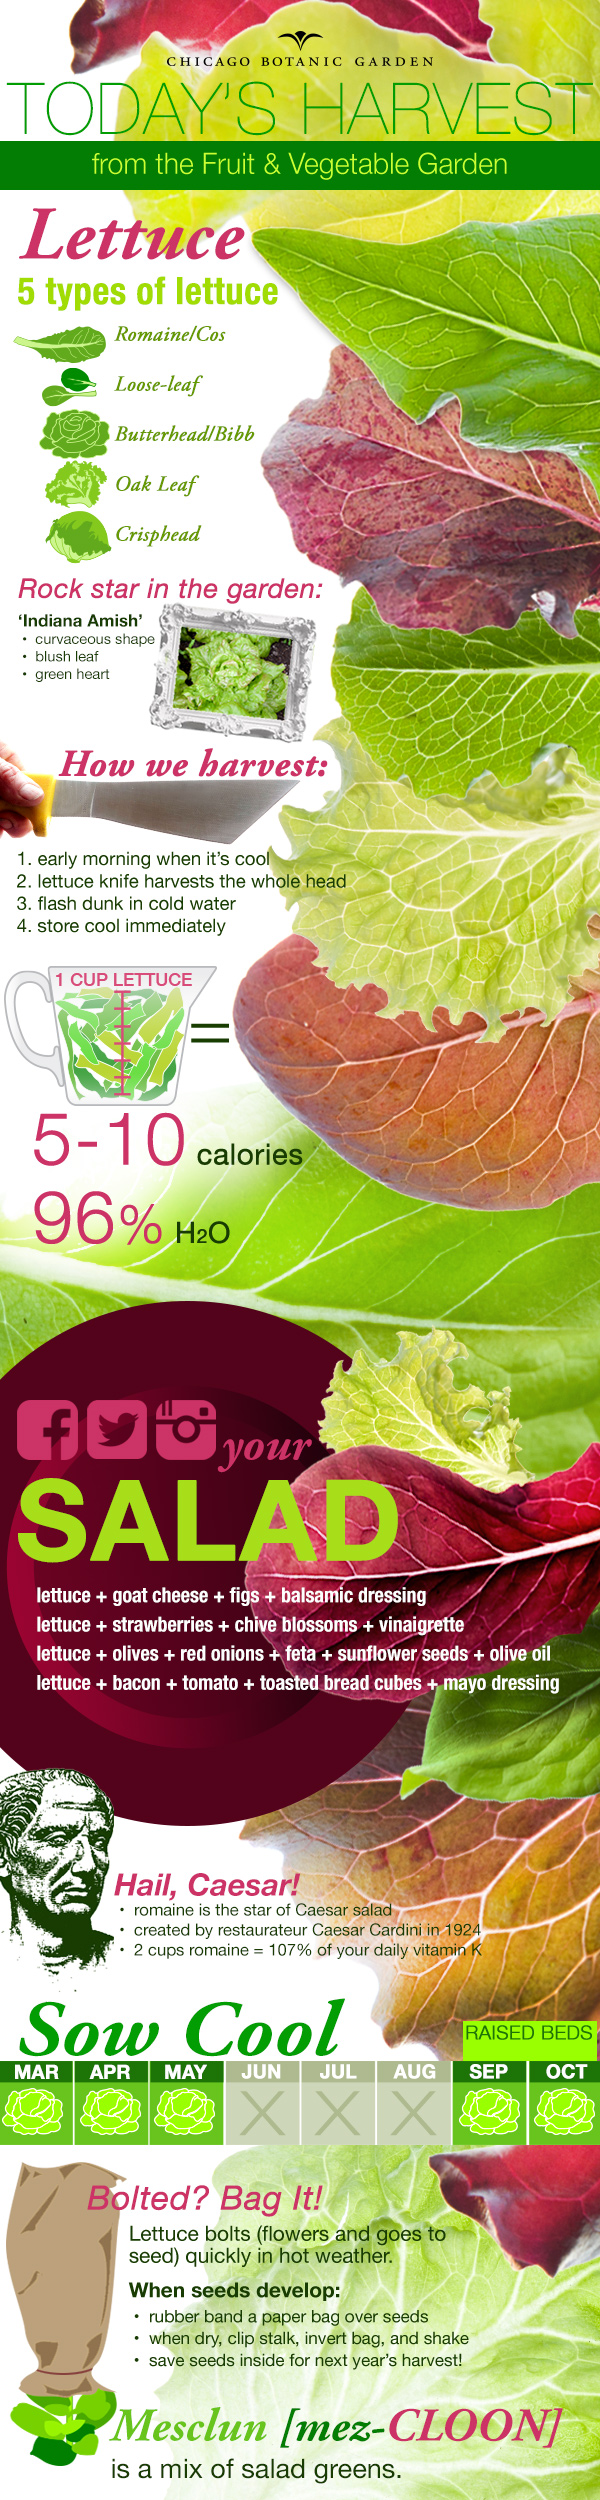 An Infographic on Lettuce